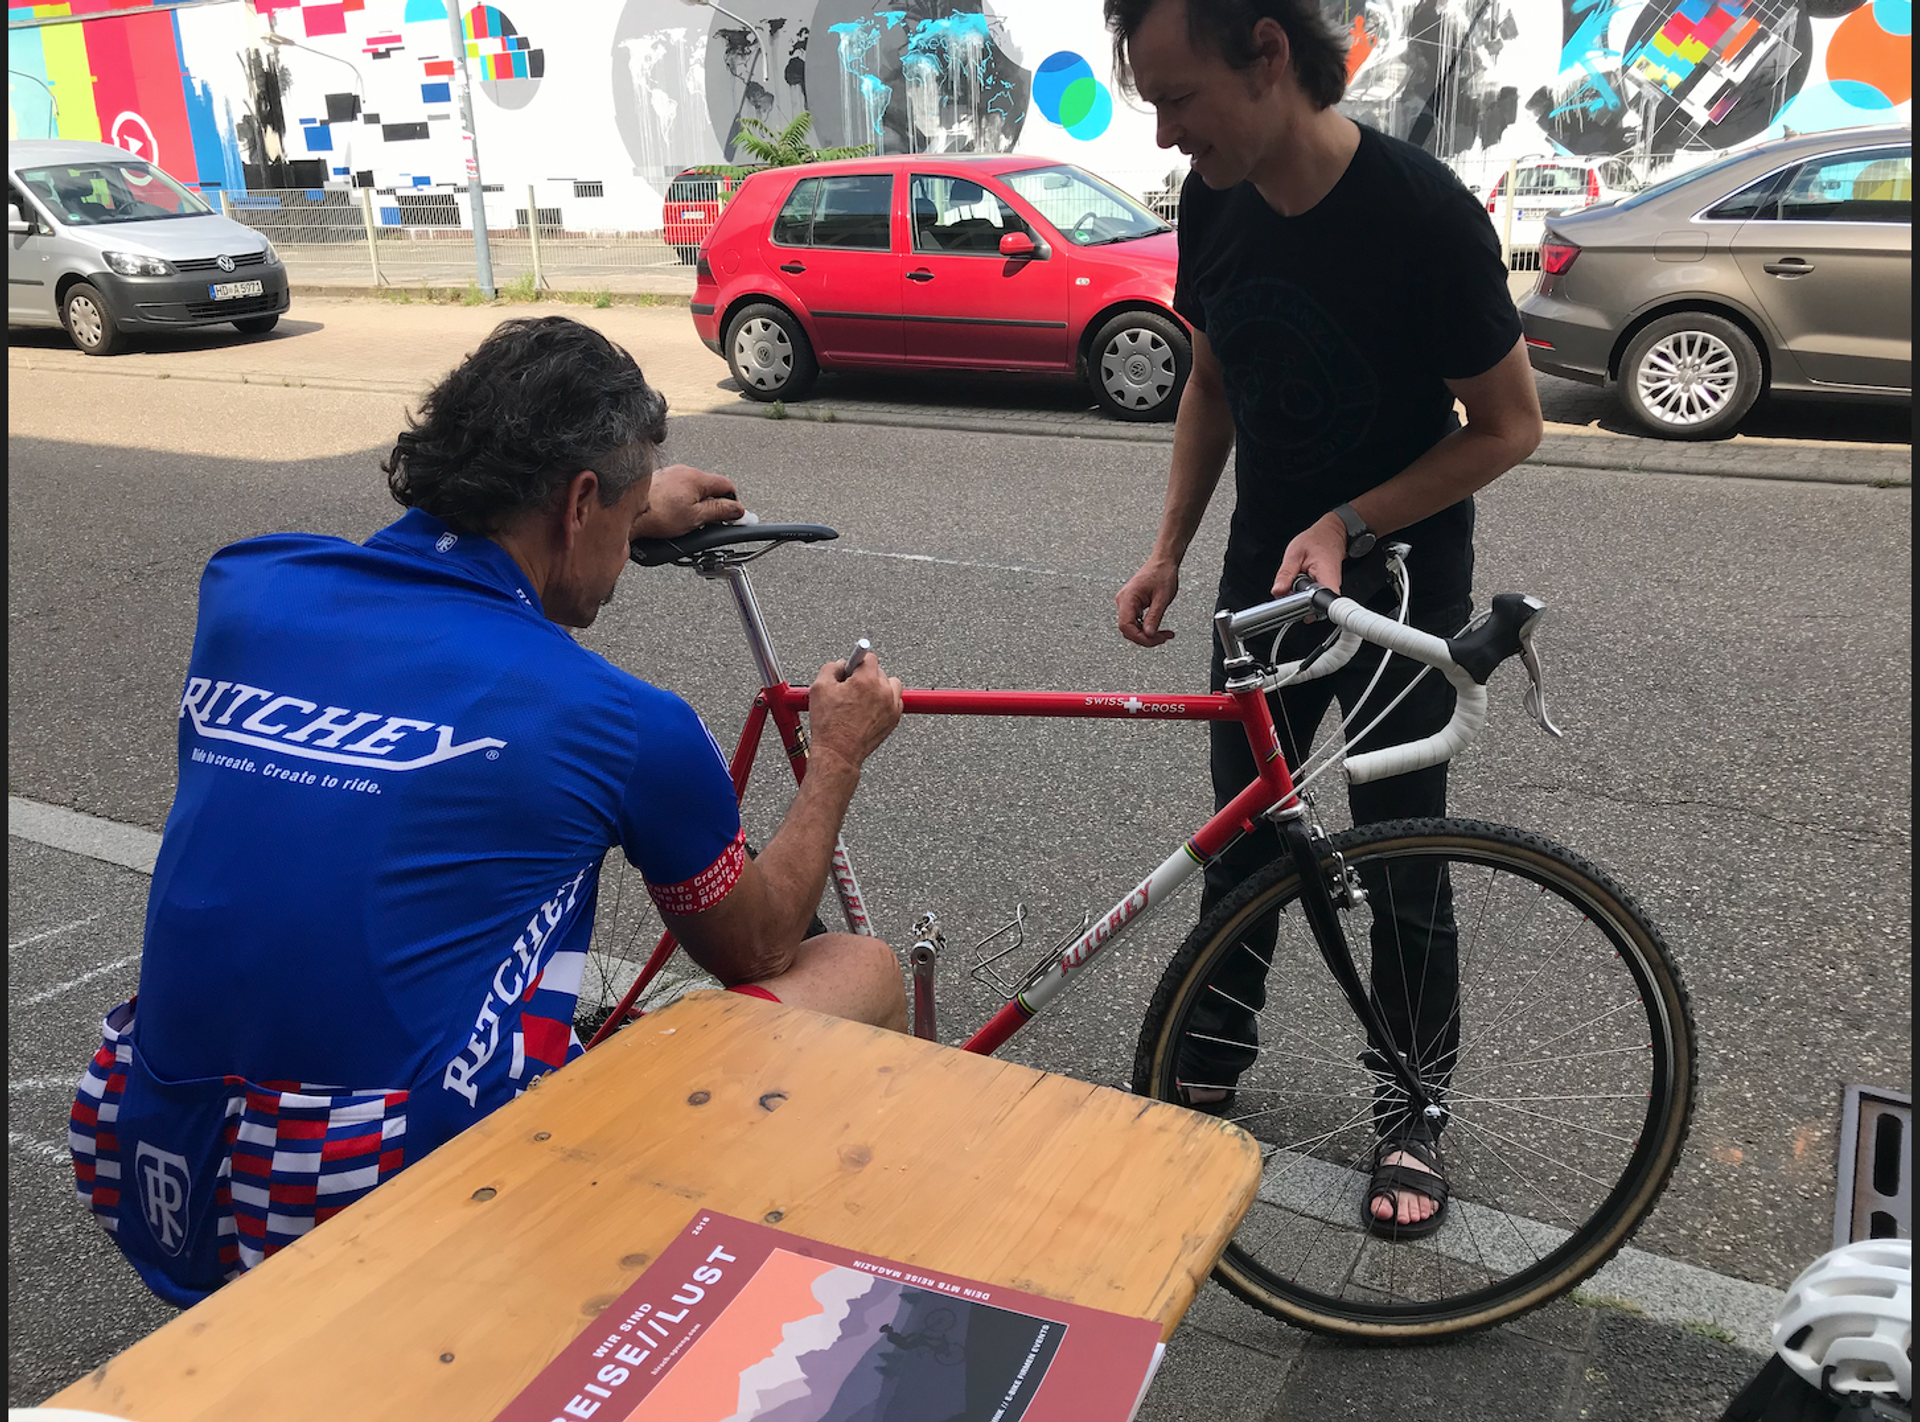 Tom Ritchey signing a bicycle in Germany.